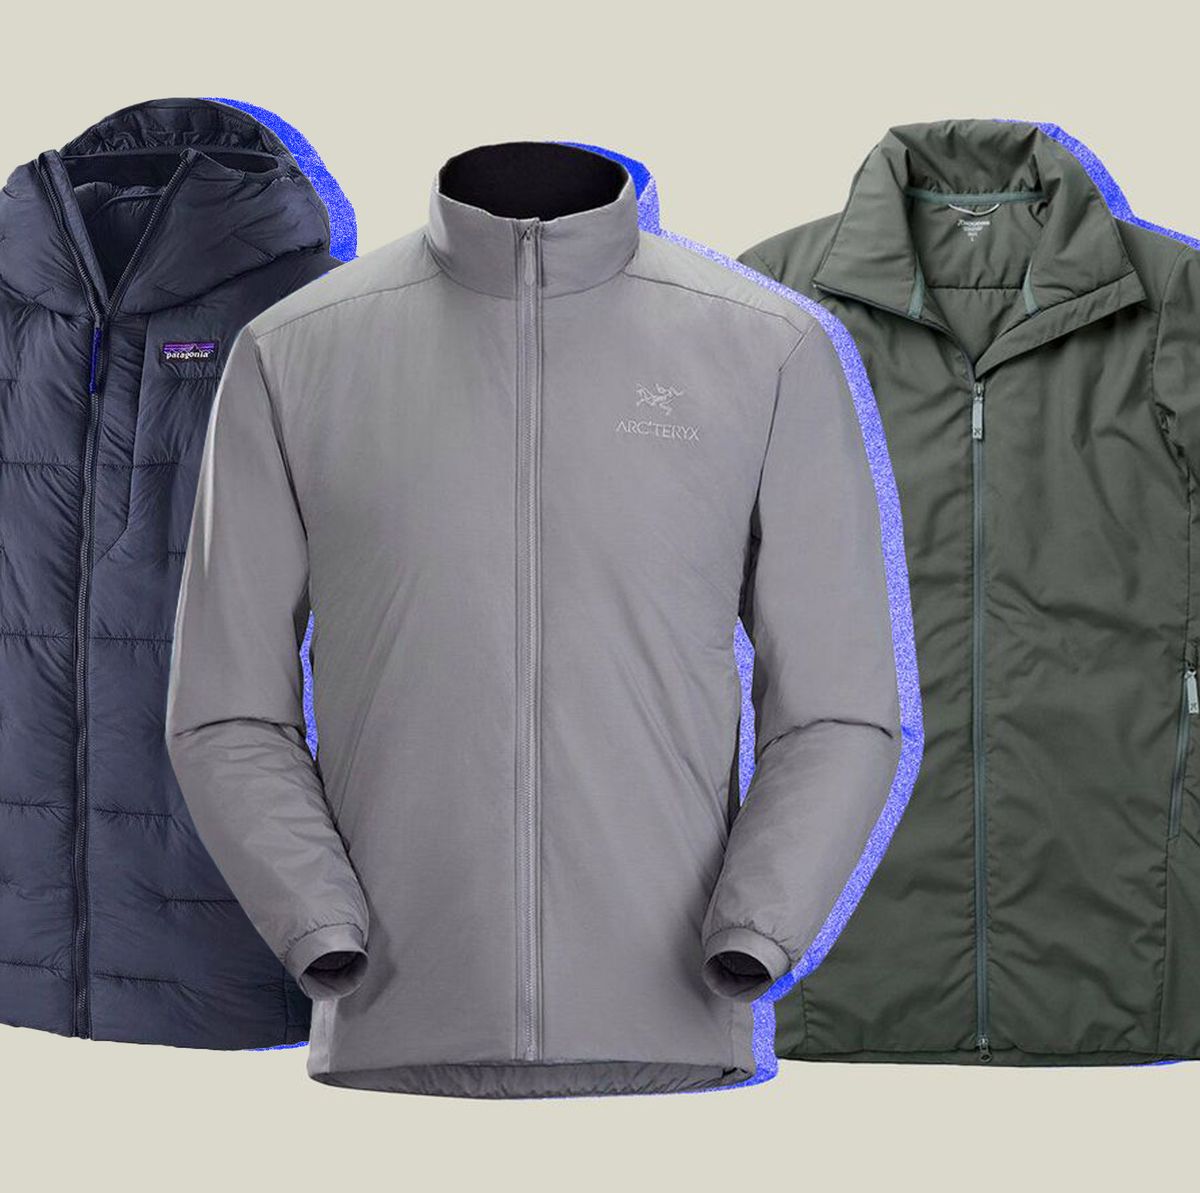 How to Wash a Down Jacket & Synthetic Insulation Jacket